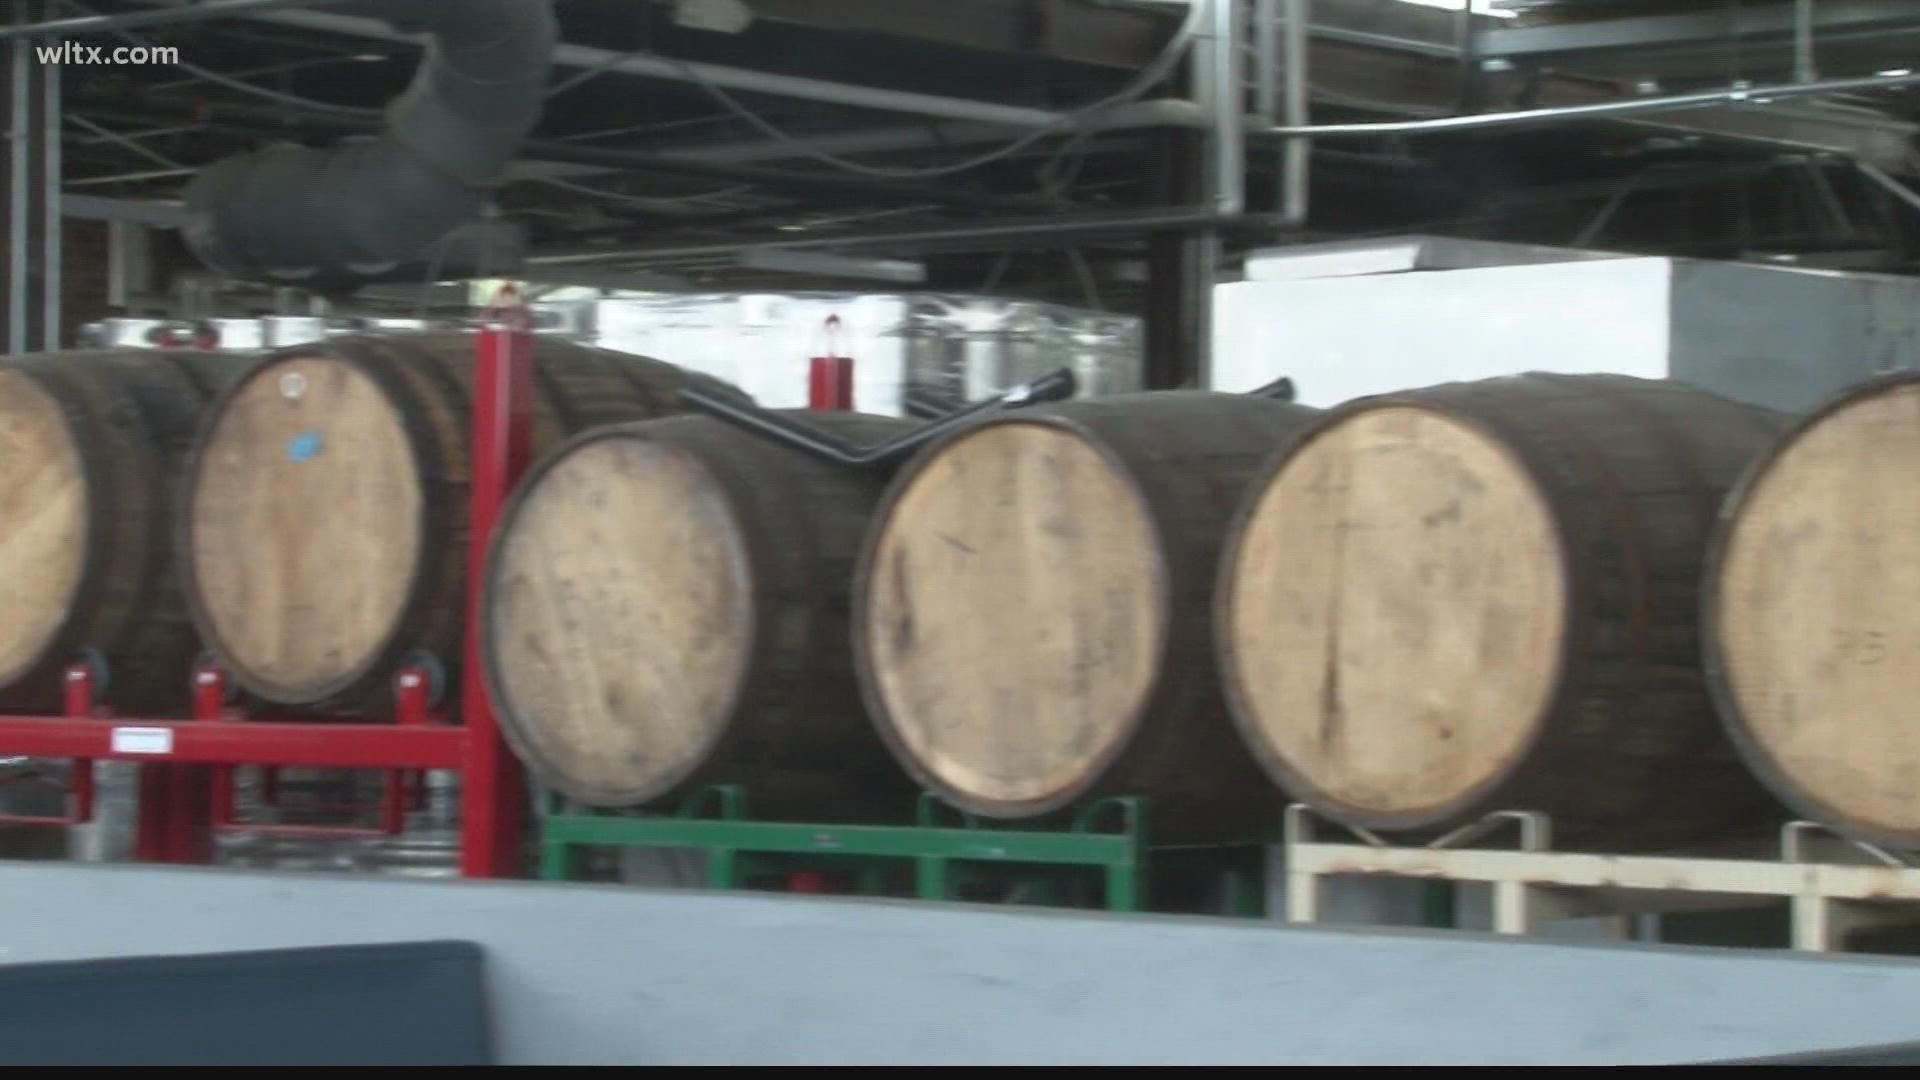 Local distilleries and breweries look to bring in customers.